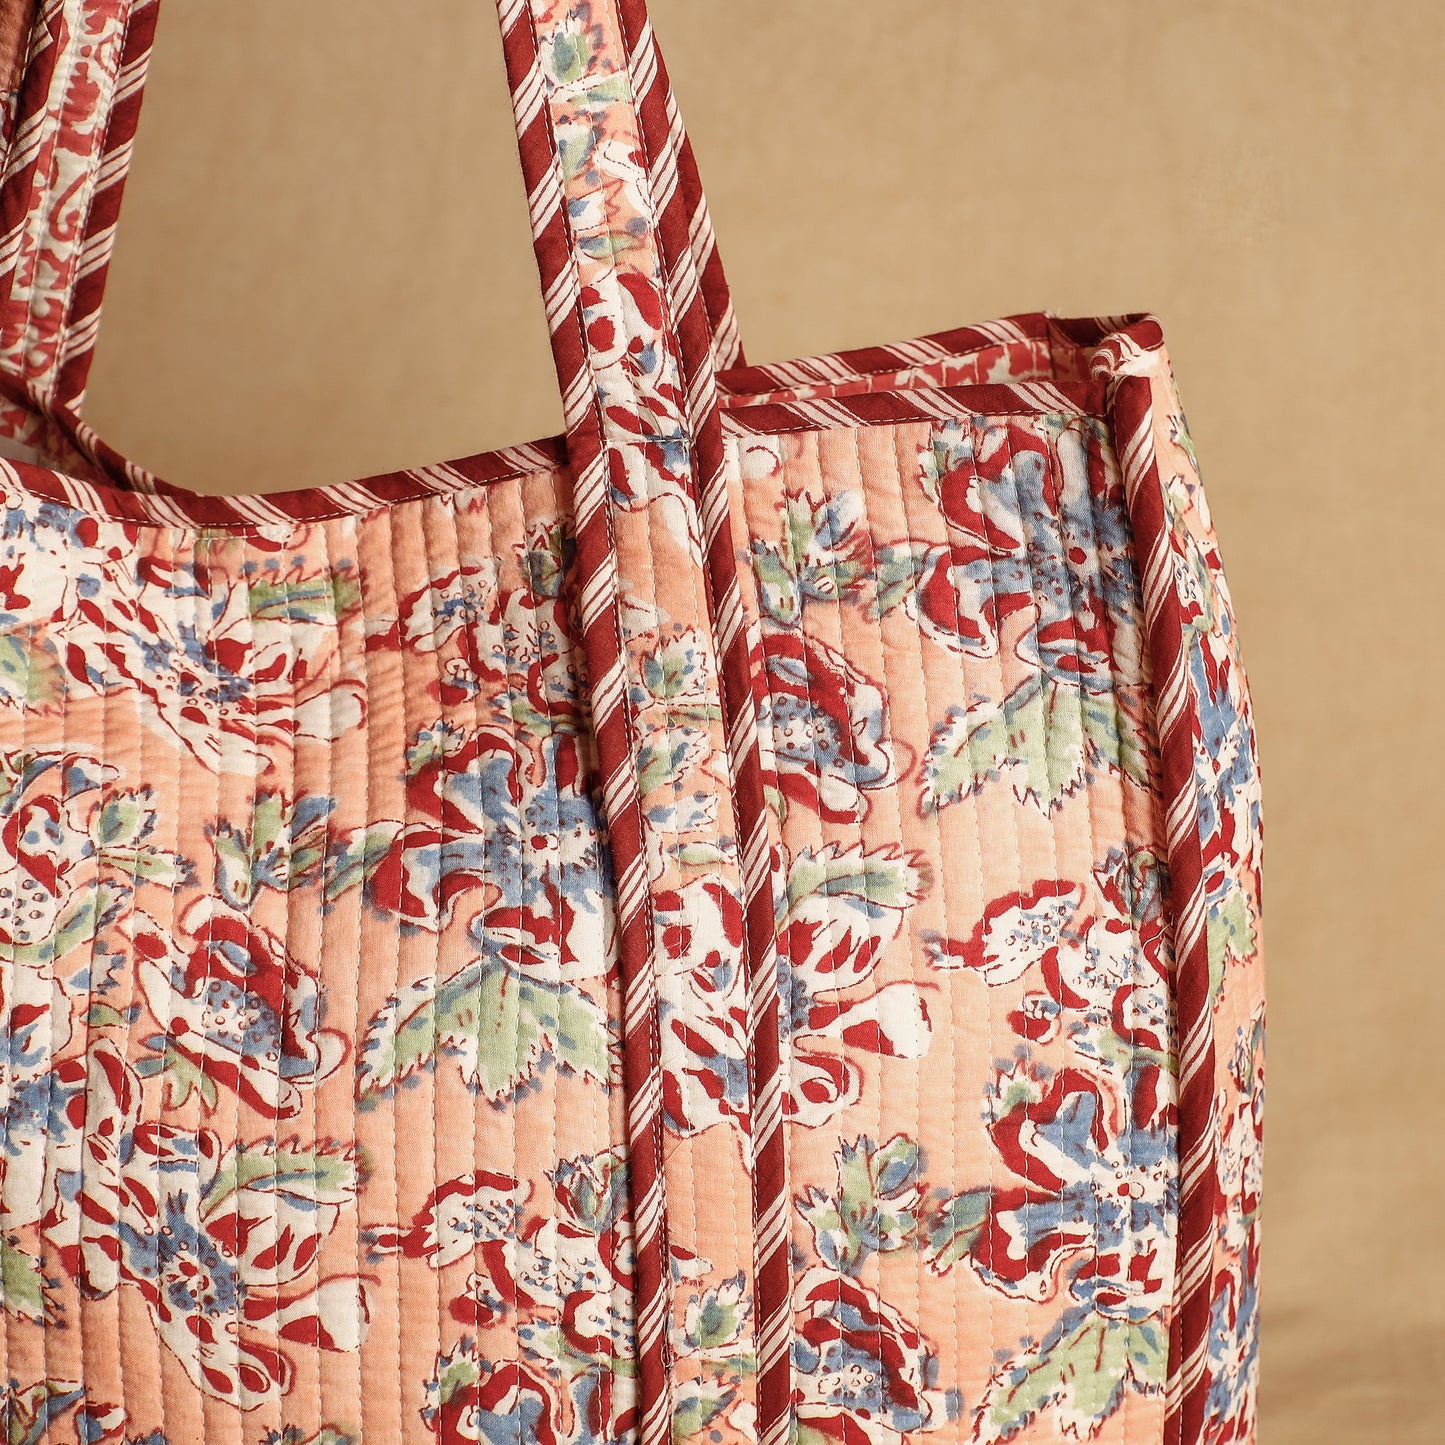 Peach - Handcrafted Sanganeri Quilted Cotton Tote Bag